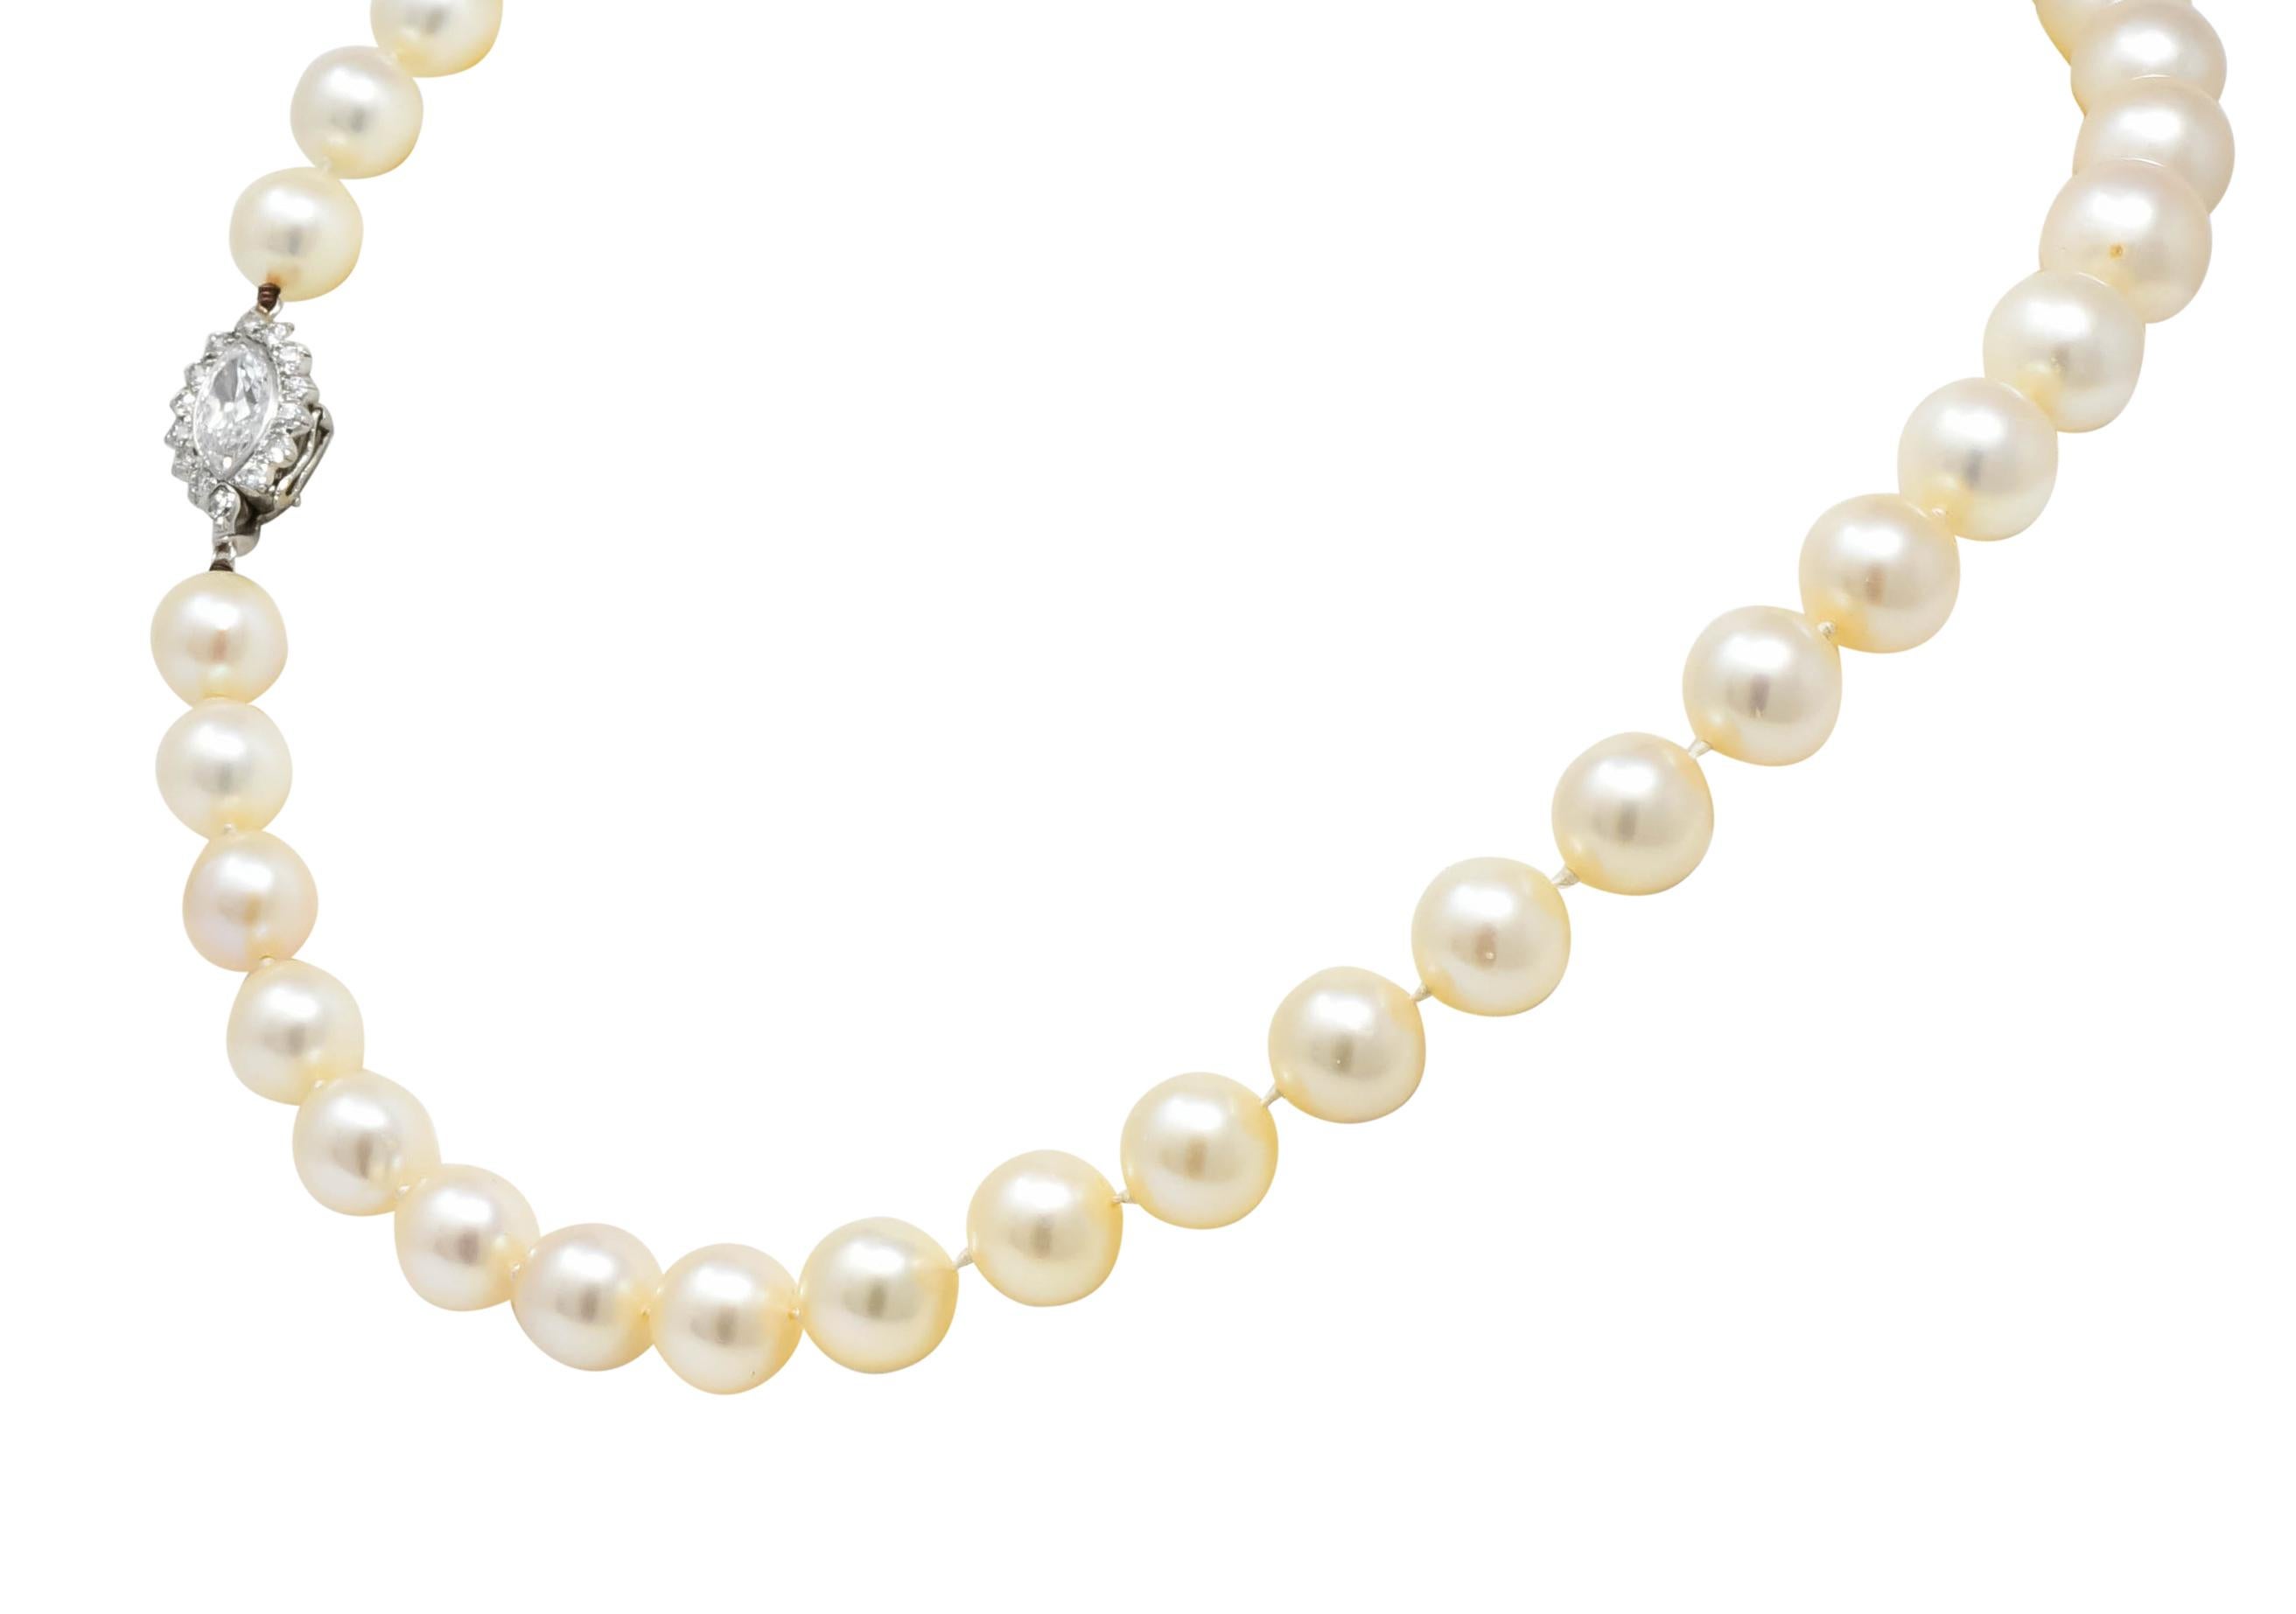 Necklace comprised of thirty-seven cultured pearls measuring approximately 8.4 to 10.2 mm, cream in body color with rosé overtones and good luster

Pearls are hand knotted into a graduated strand completed cluster clasp

Centering a bezel set